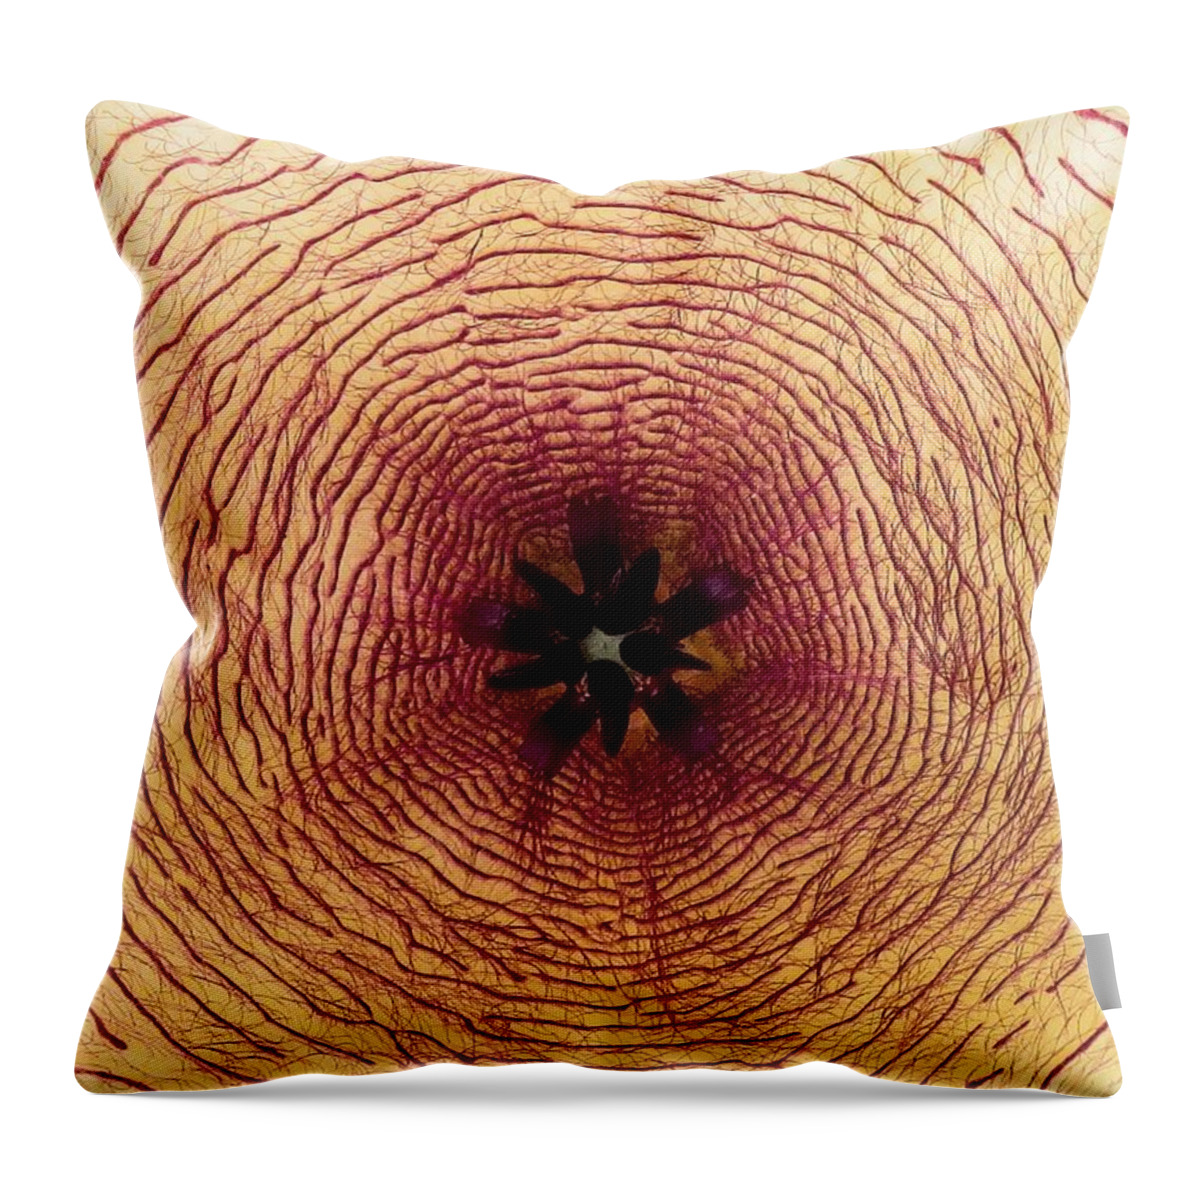 Stapelia Throw Pillow featuring the photograph Inside by Zina Stromberg